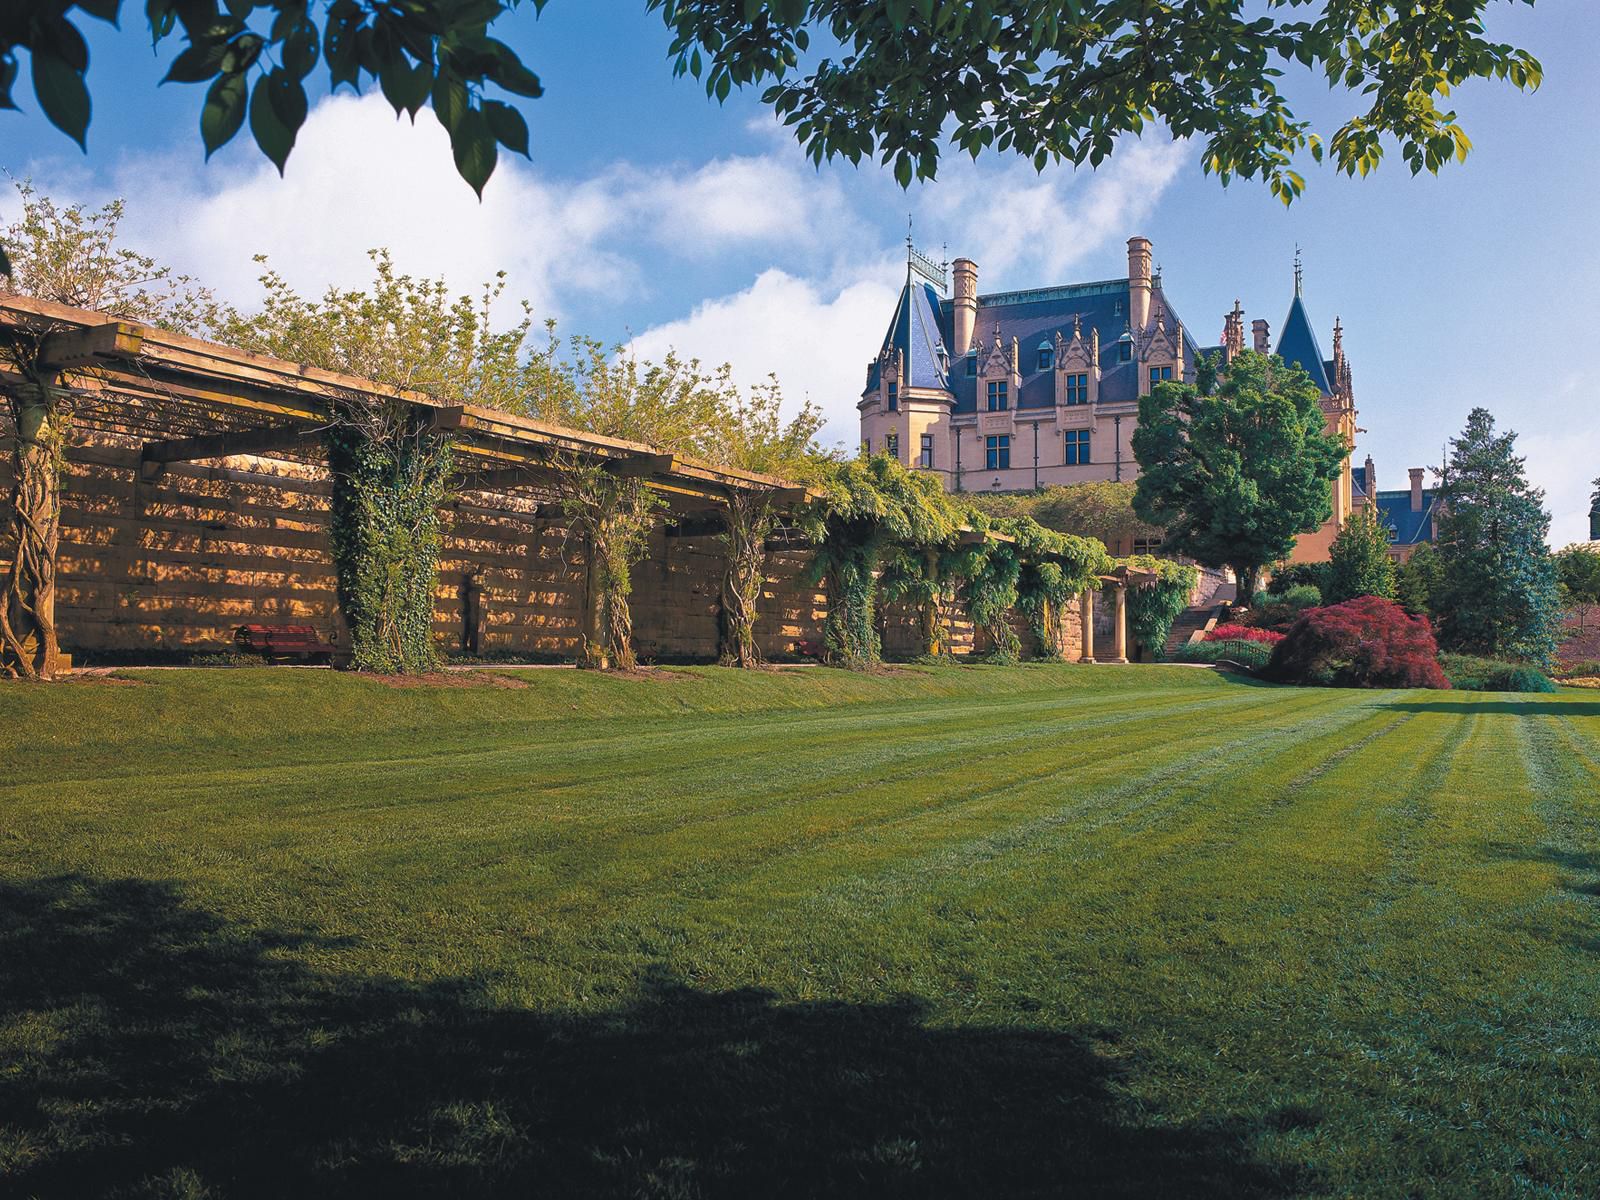 From Biltmore House to the North Carolina Arboretum, you can easily explore all the area has to offer when staying at our pet-friendly hotel near downtown Asheville. Hop on our downtown shuttle and exit at New Belgium Brewing Company. Enjoy a hand-crafted beer before strolling through the River Arts District or browsing the myriad boutiques. 